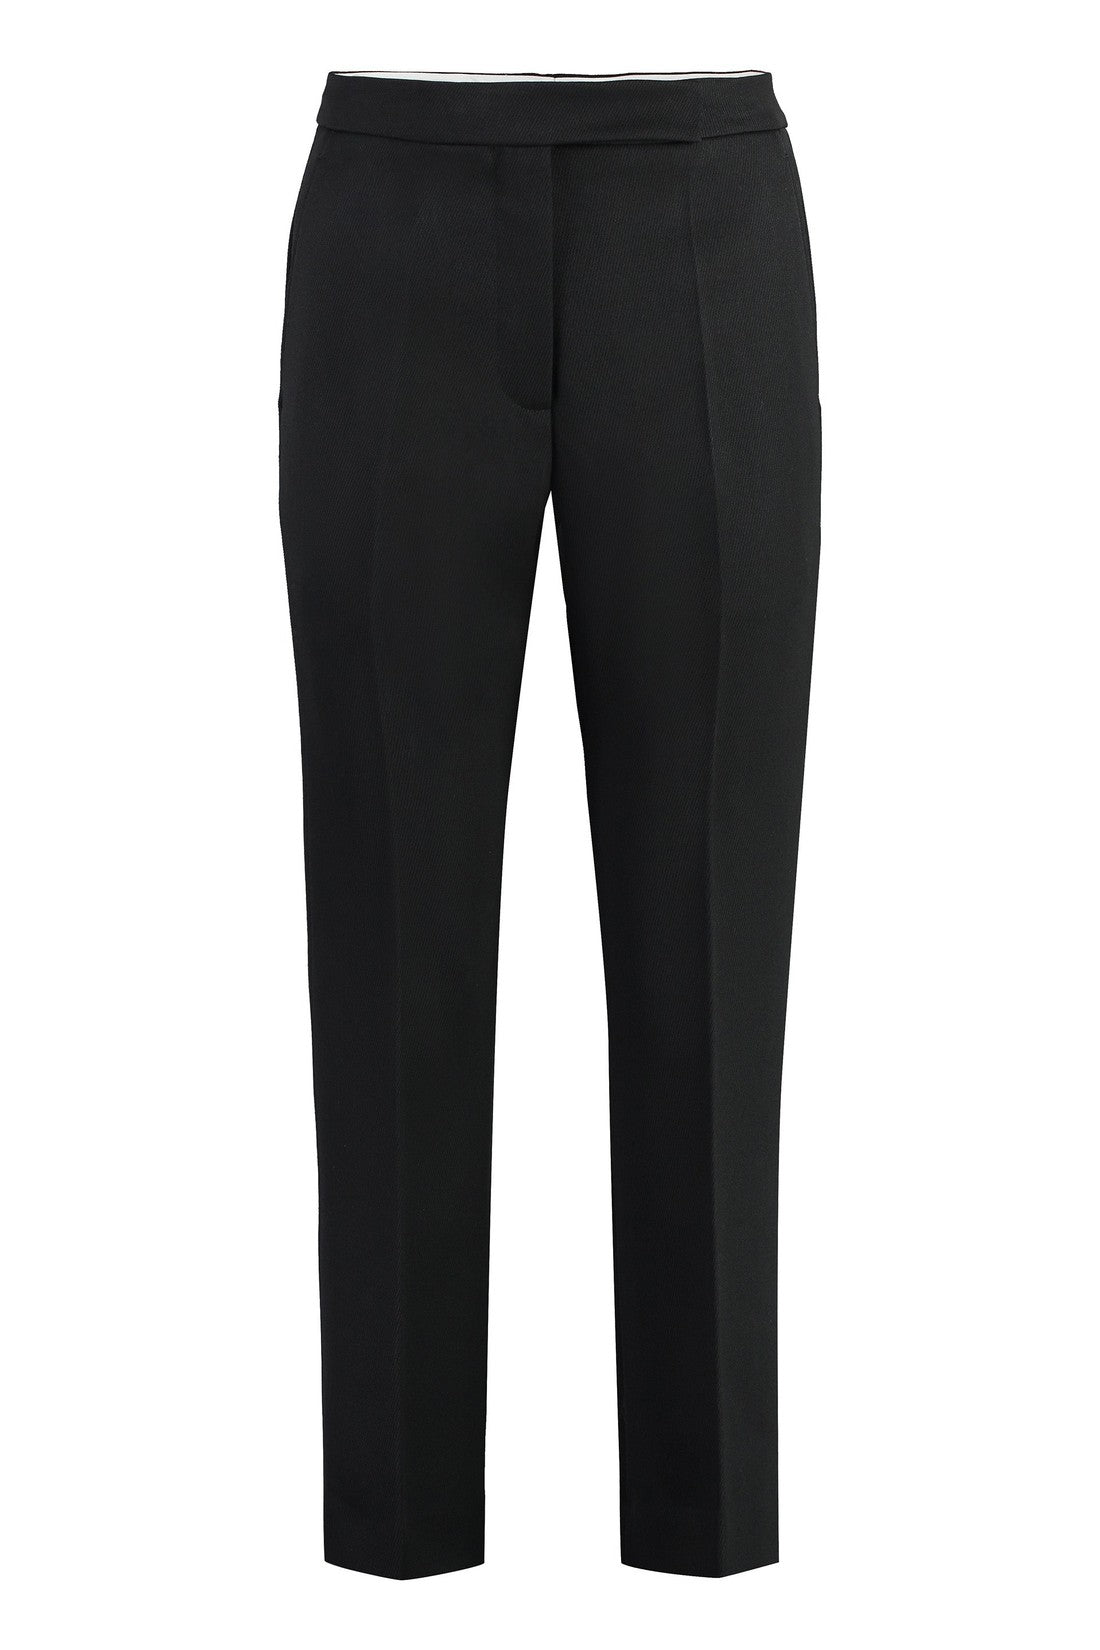 Tory Burch-OUTLET-SALE-Wool trousers-ARCHIVIST